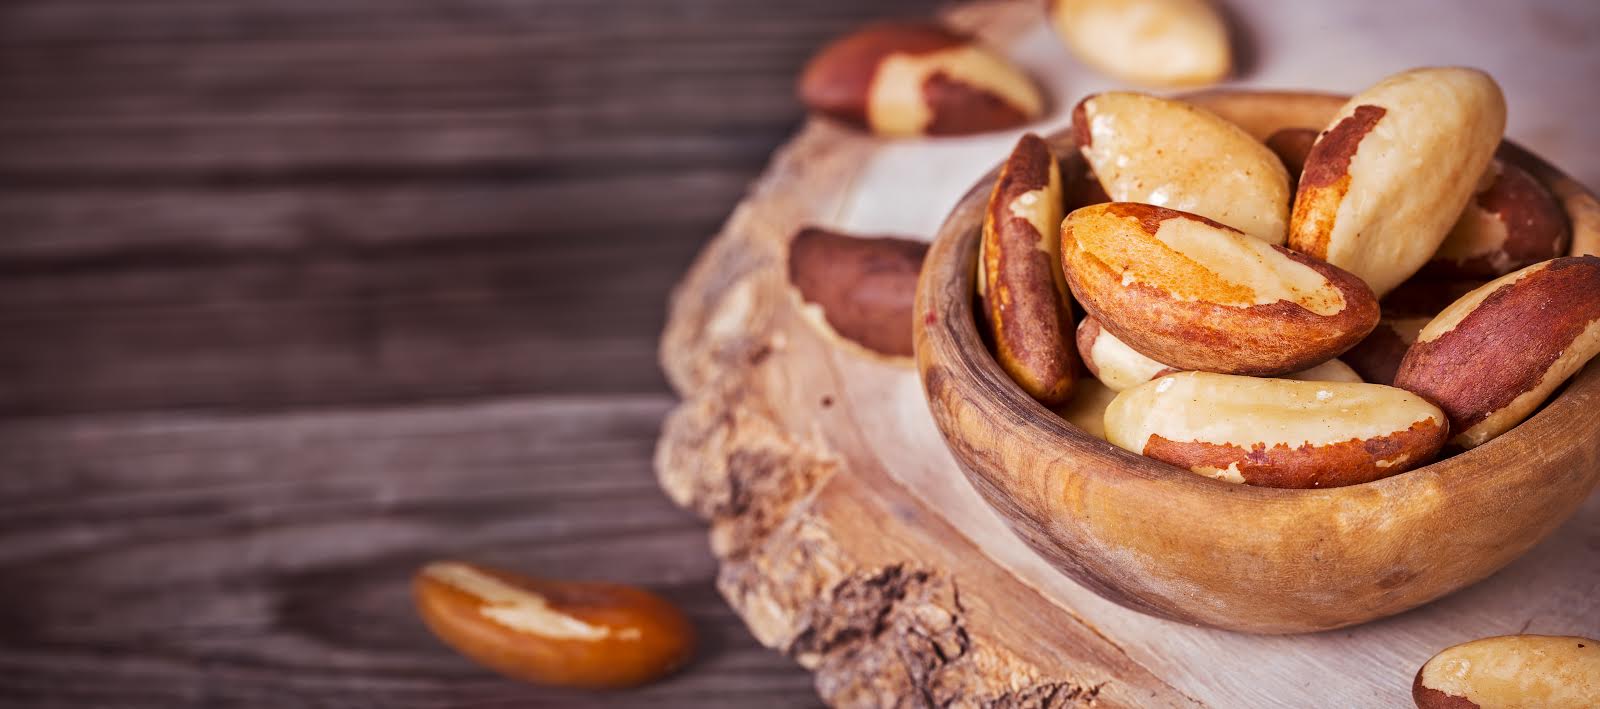 recipes for kids with anxiety - brazil nuts